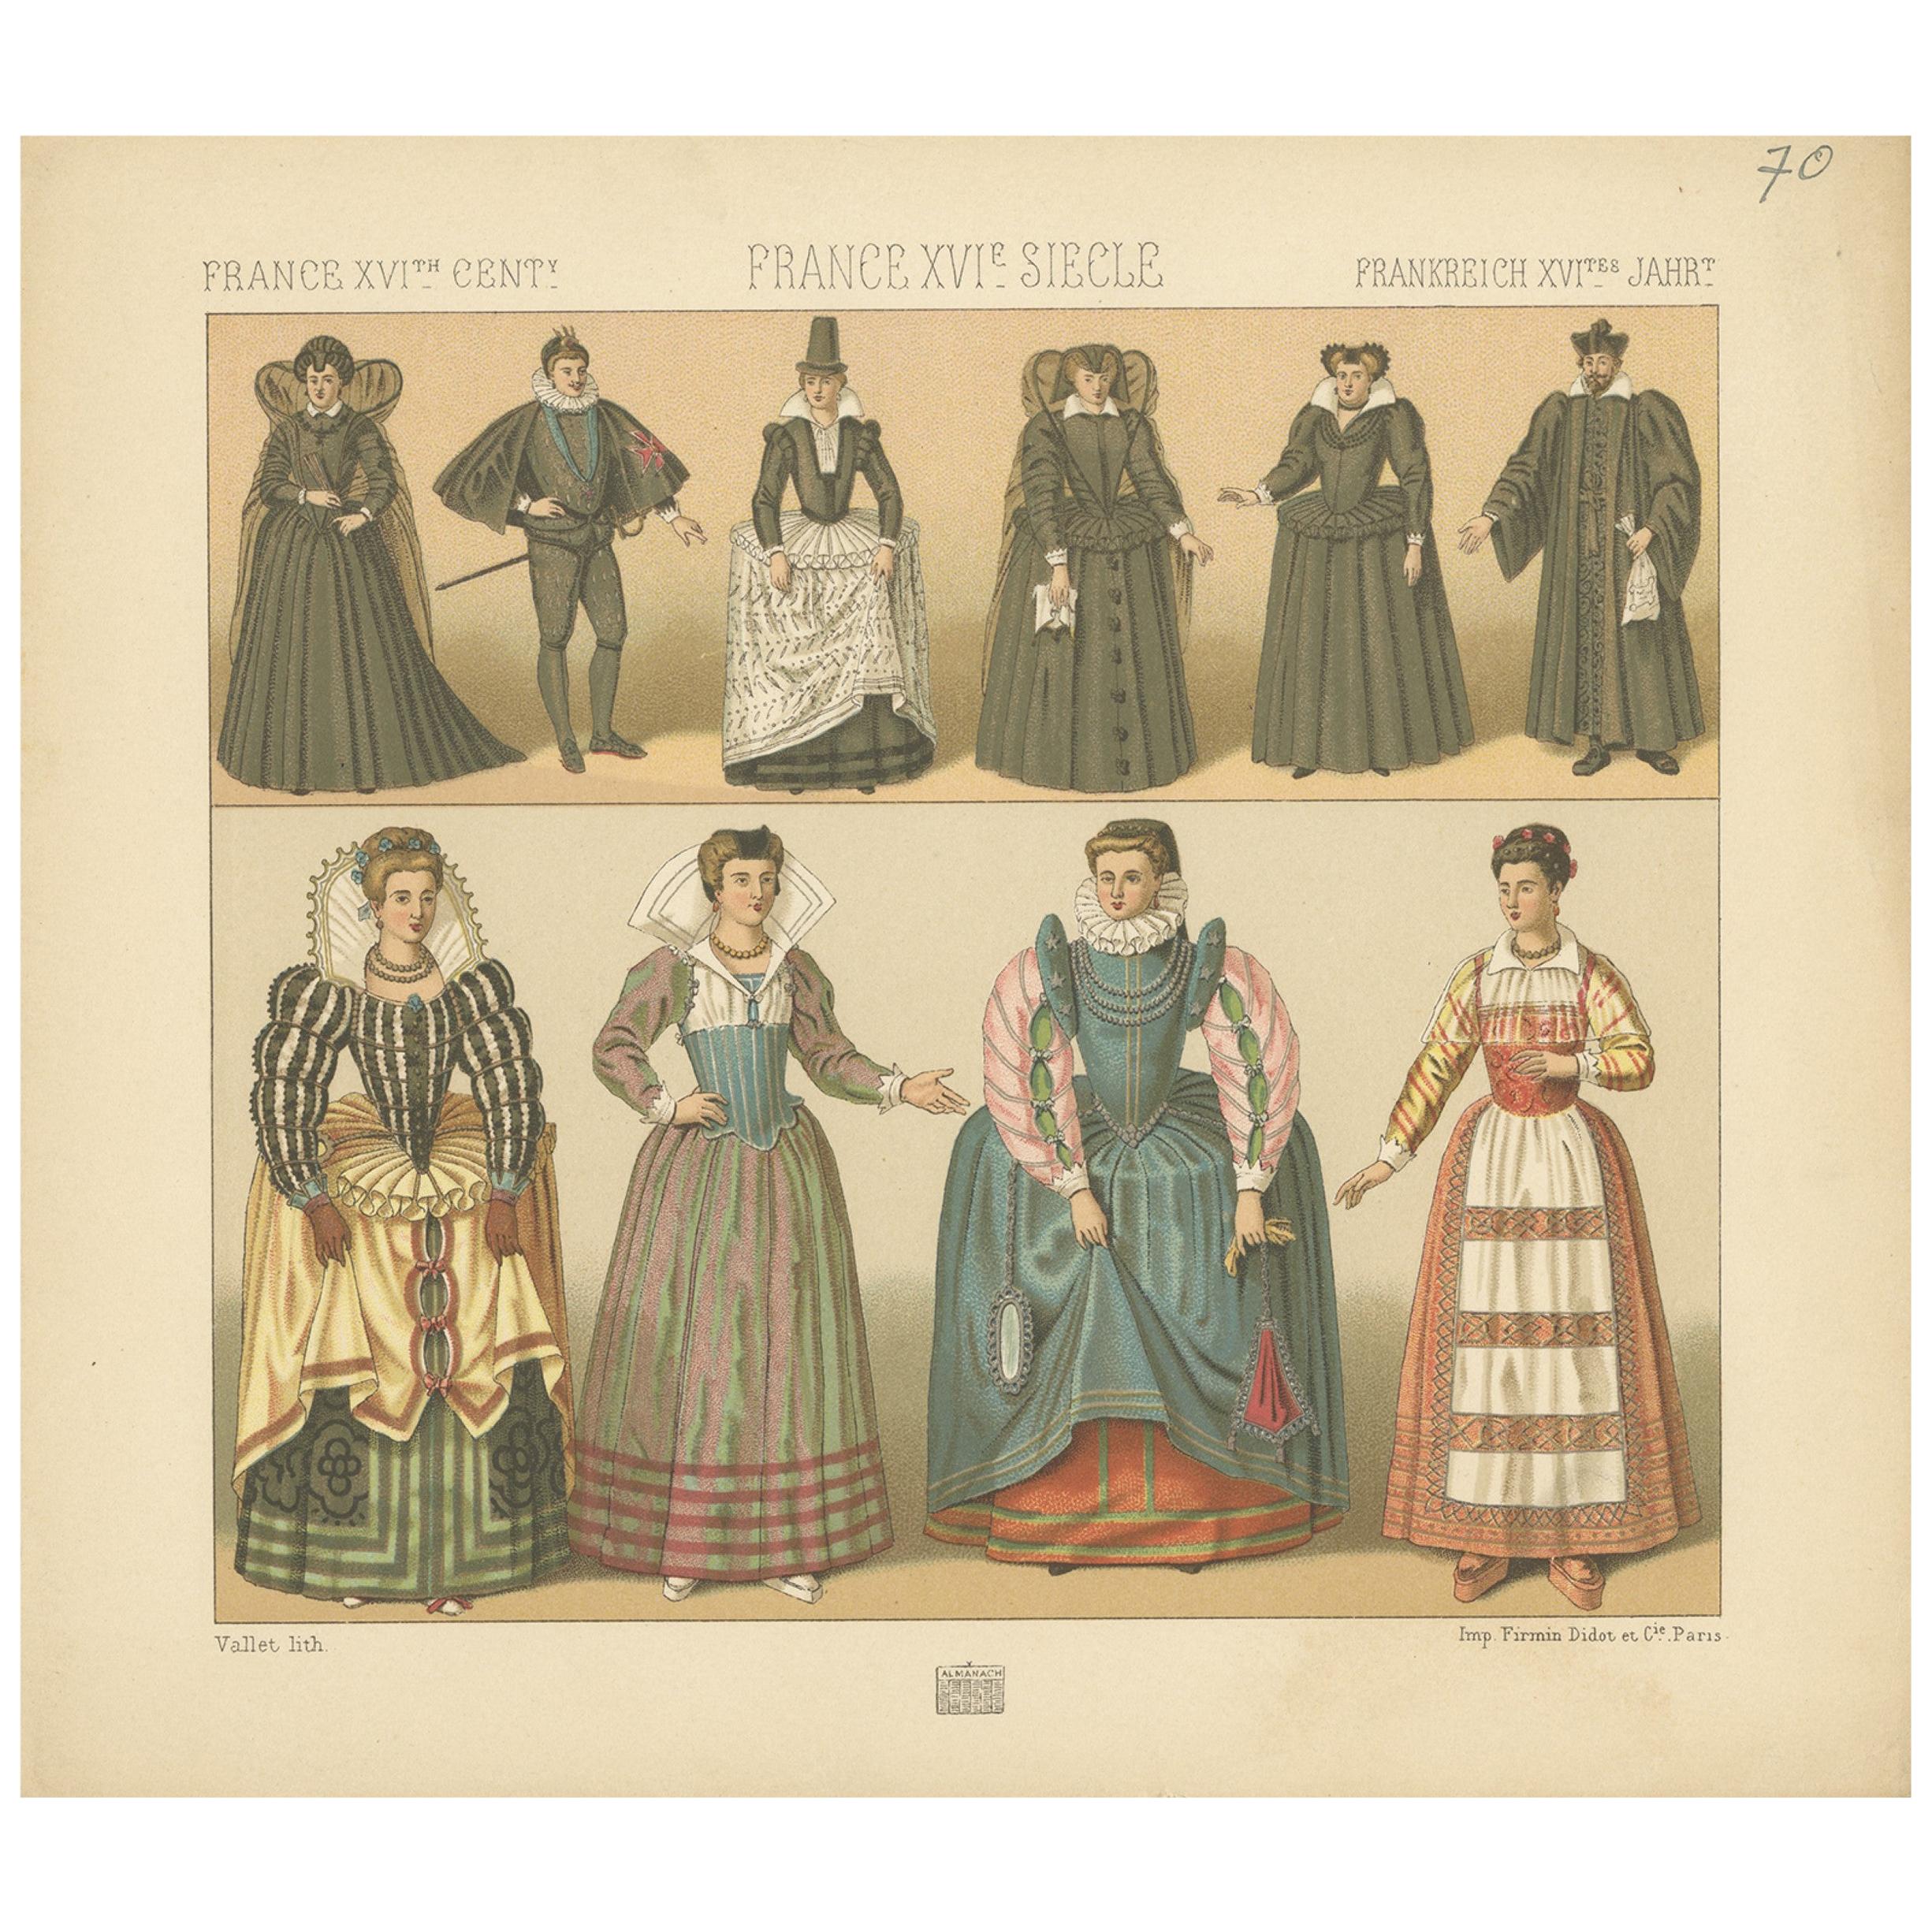 Pl. 70 Antique Print of French 16th Century Costumes by Racinet, circa 1880